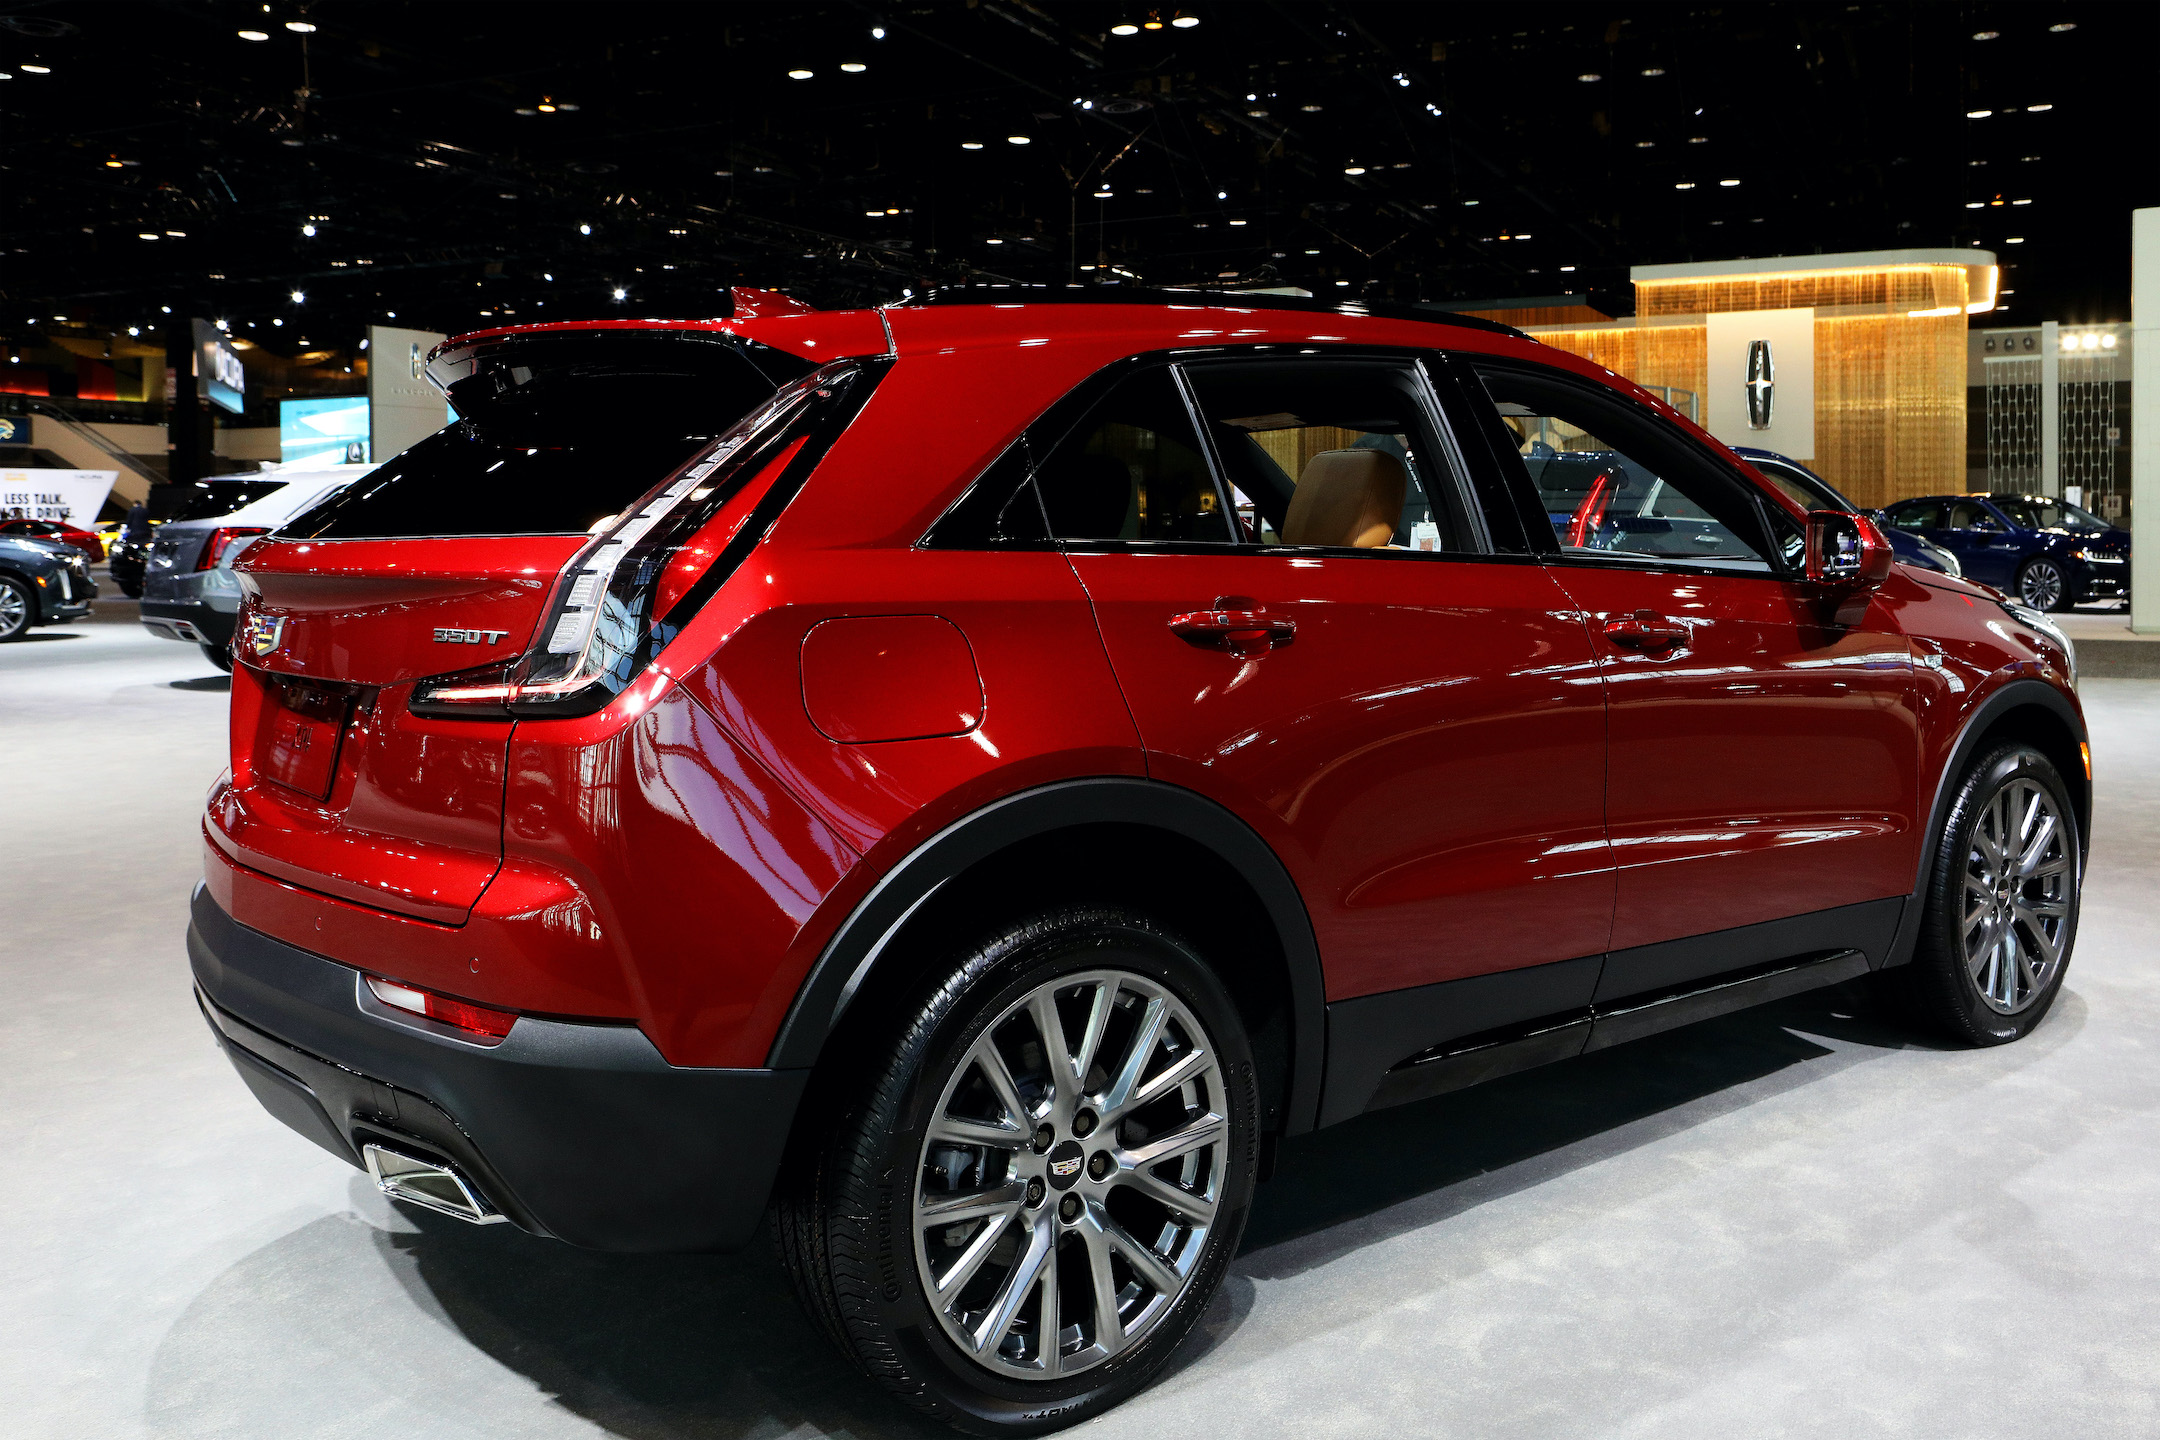 2020 Cadillac XT4 is on display at the 112th Annual Chicago Auto Show